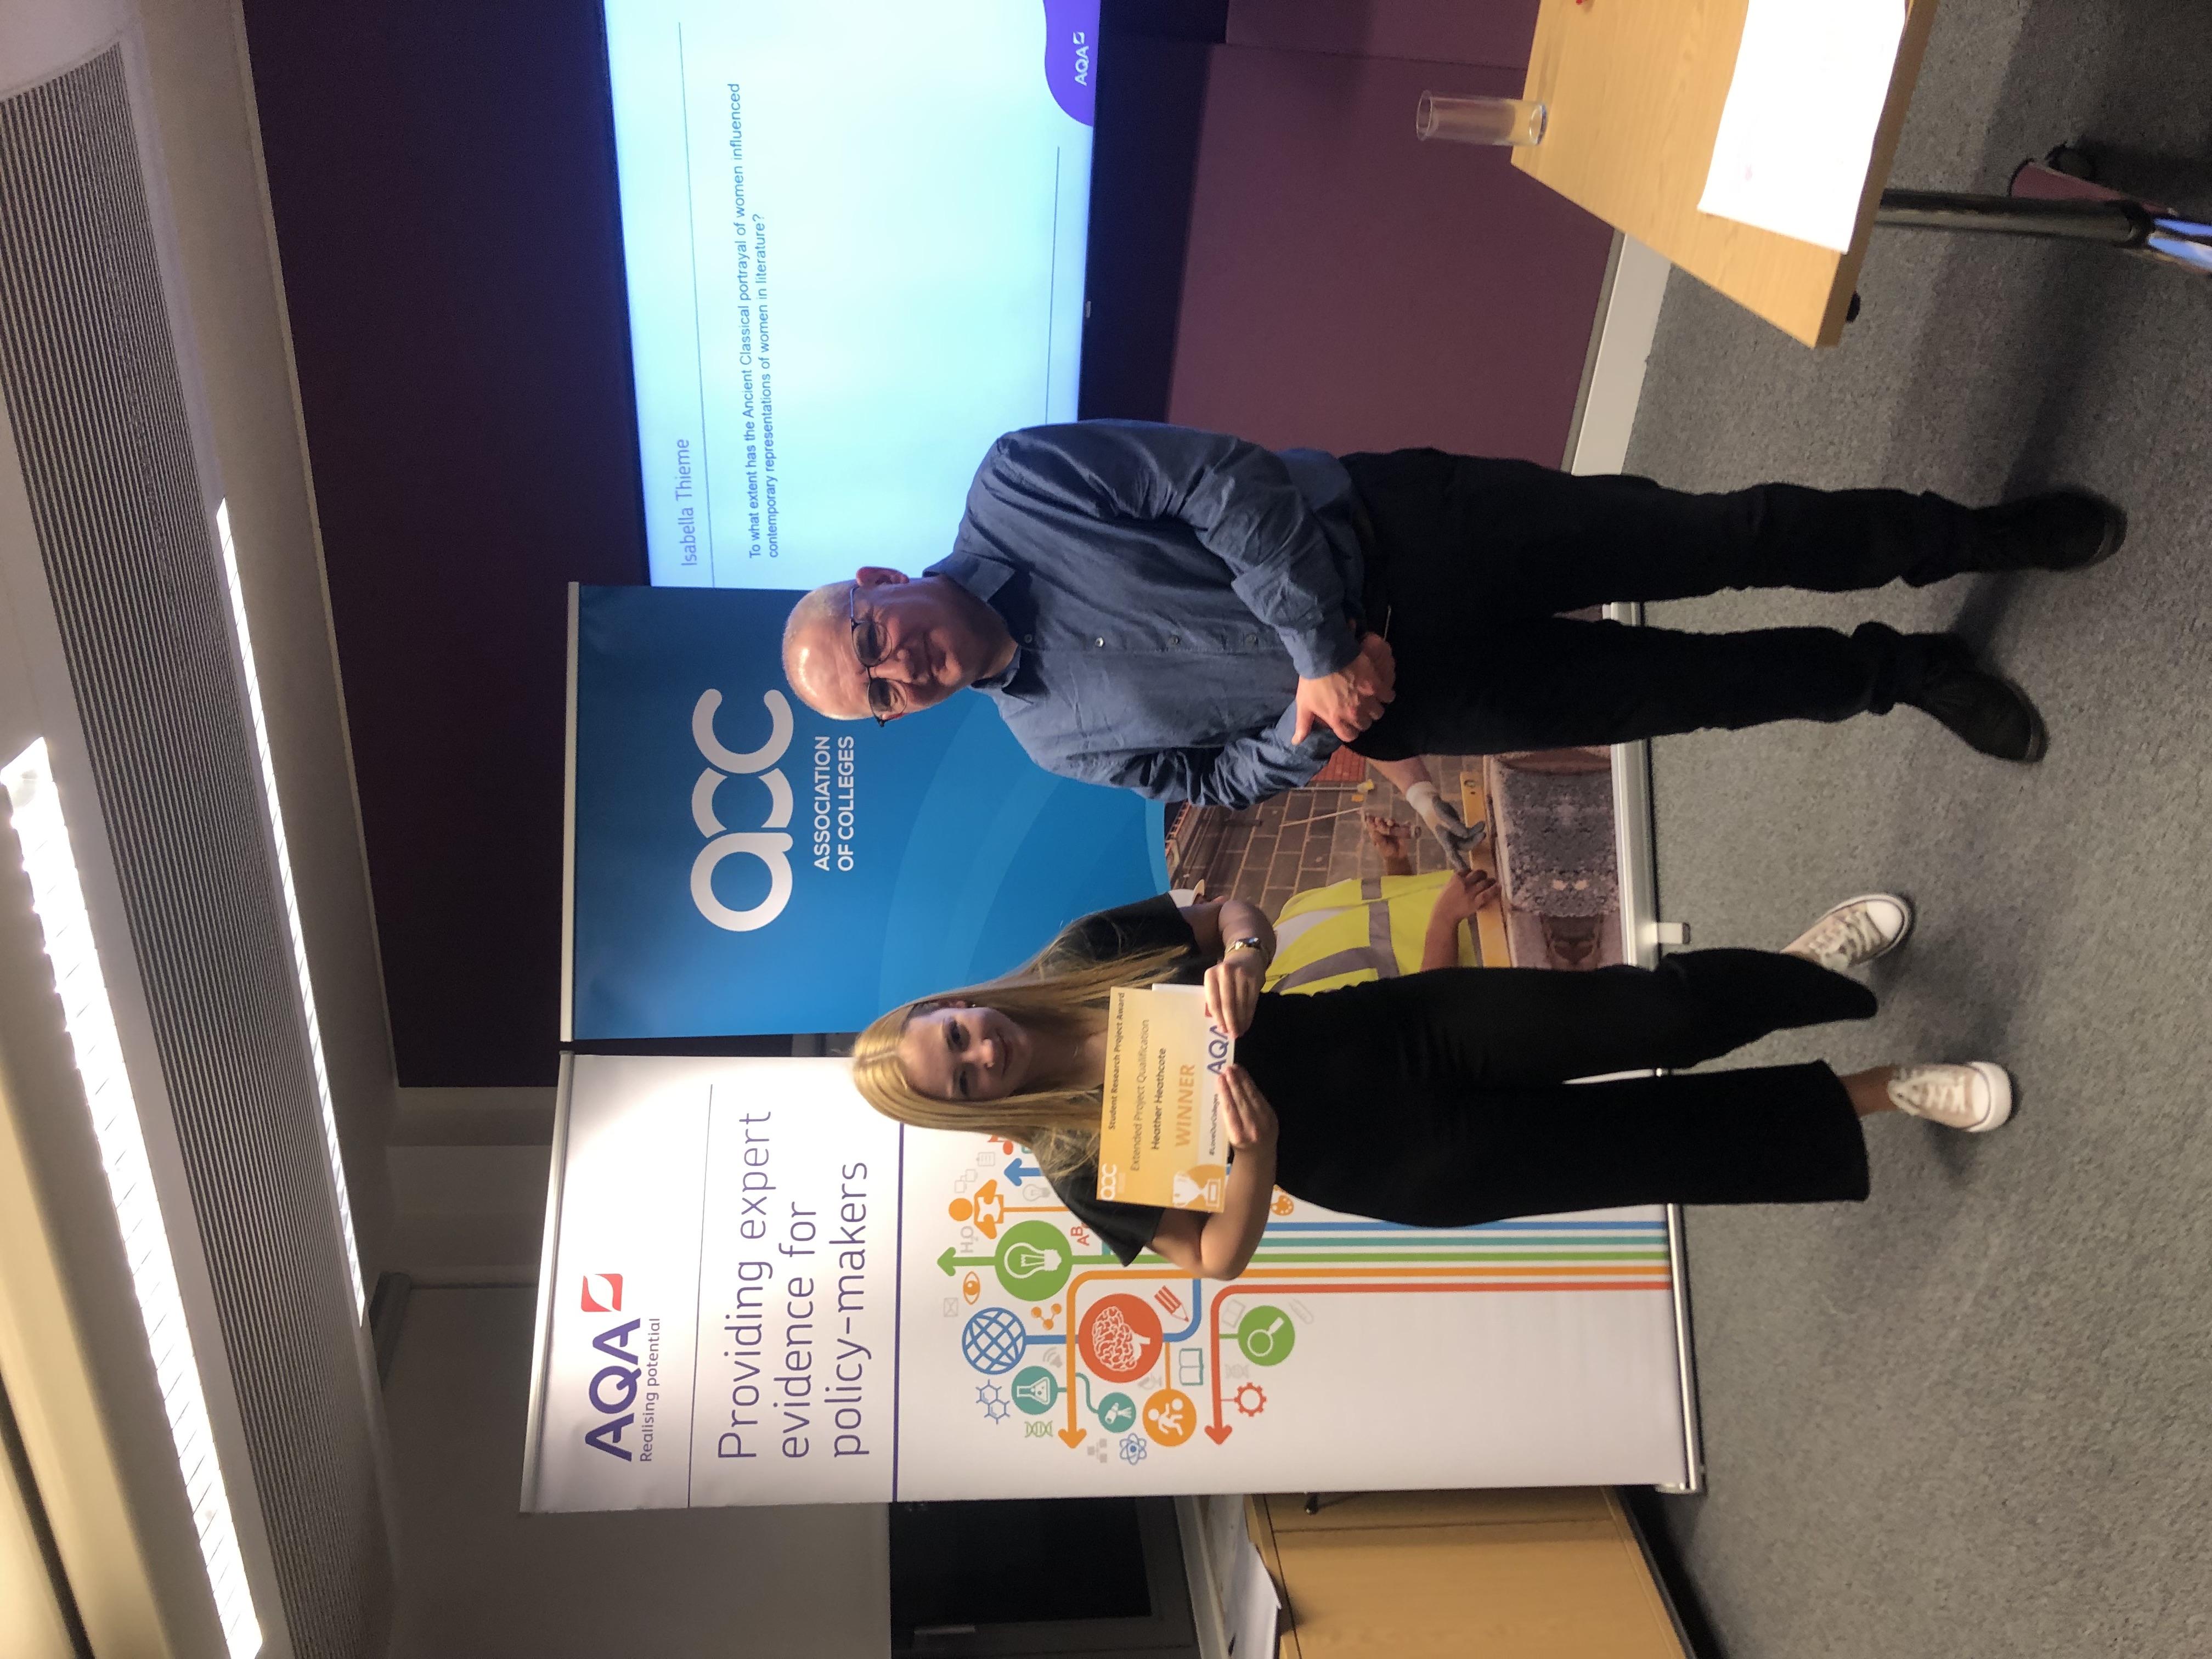 Extended Project Qualification (EPQ) award winner Heather Heathcote with Senior Policy Manager Eddie Playfair from the Association of Colleges.